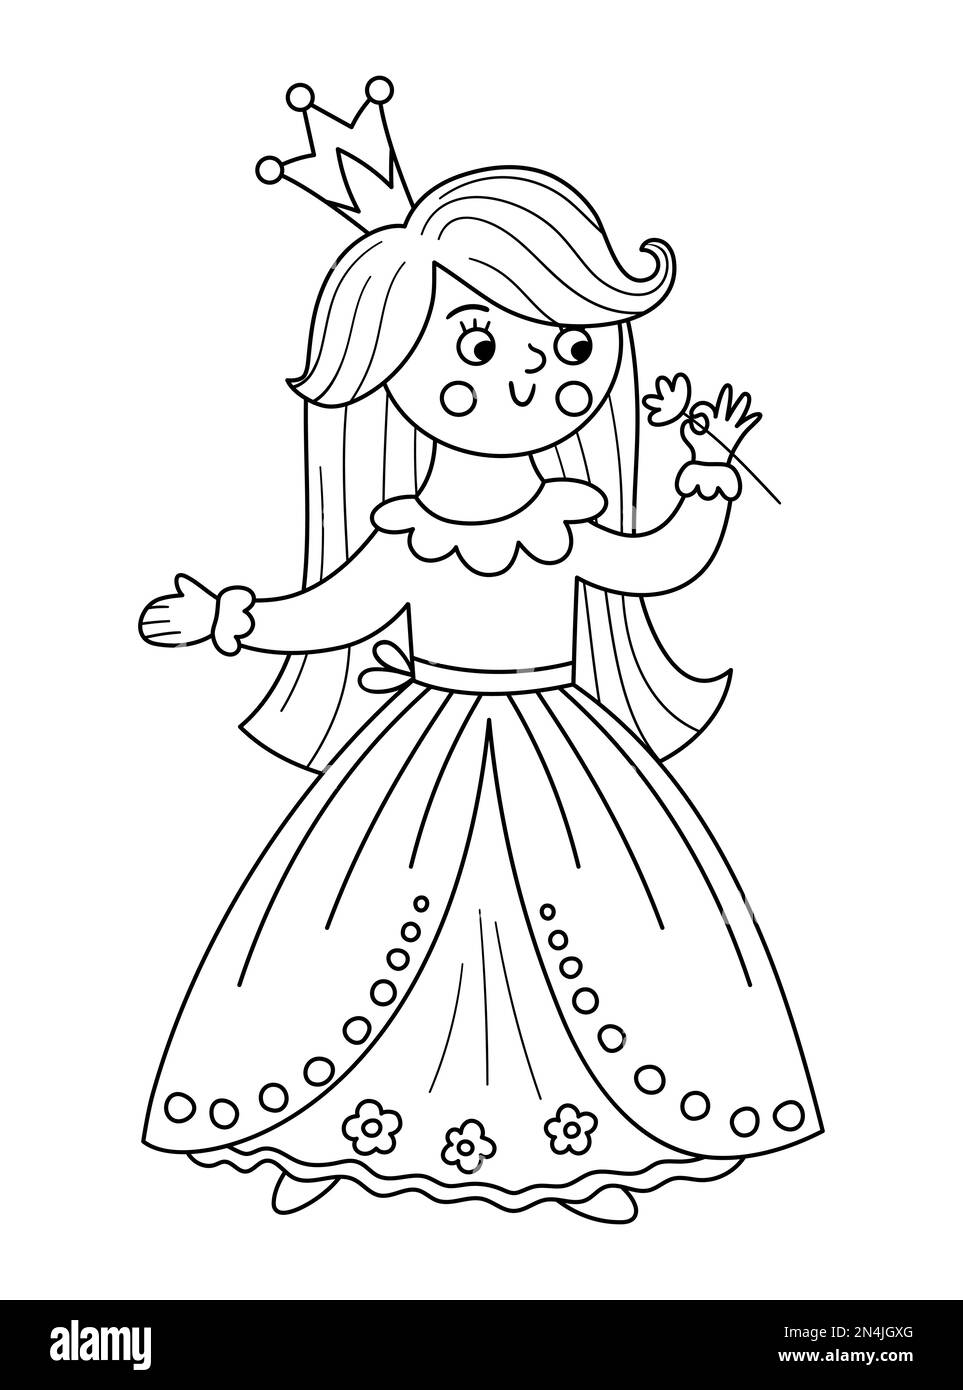 Fairy tale black and white vector princess smelling flower. Fantasy line girl in crown. Medieval fairytale maid coloring page. Girlish cartoon magic i Stock Vector